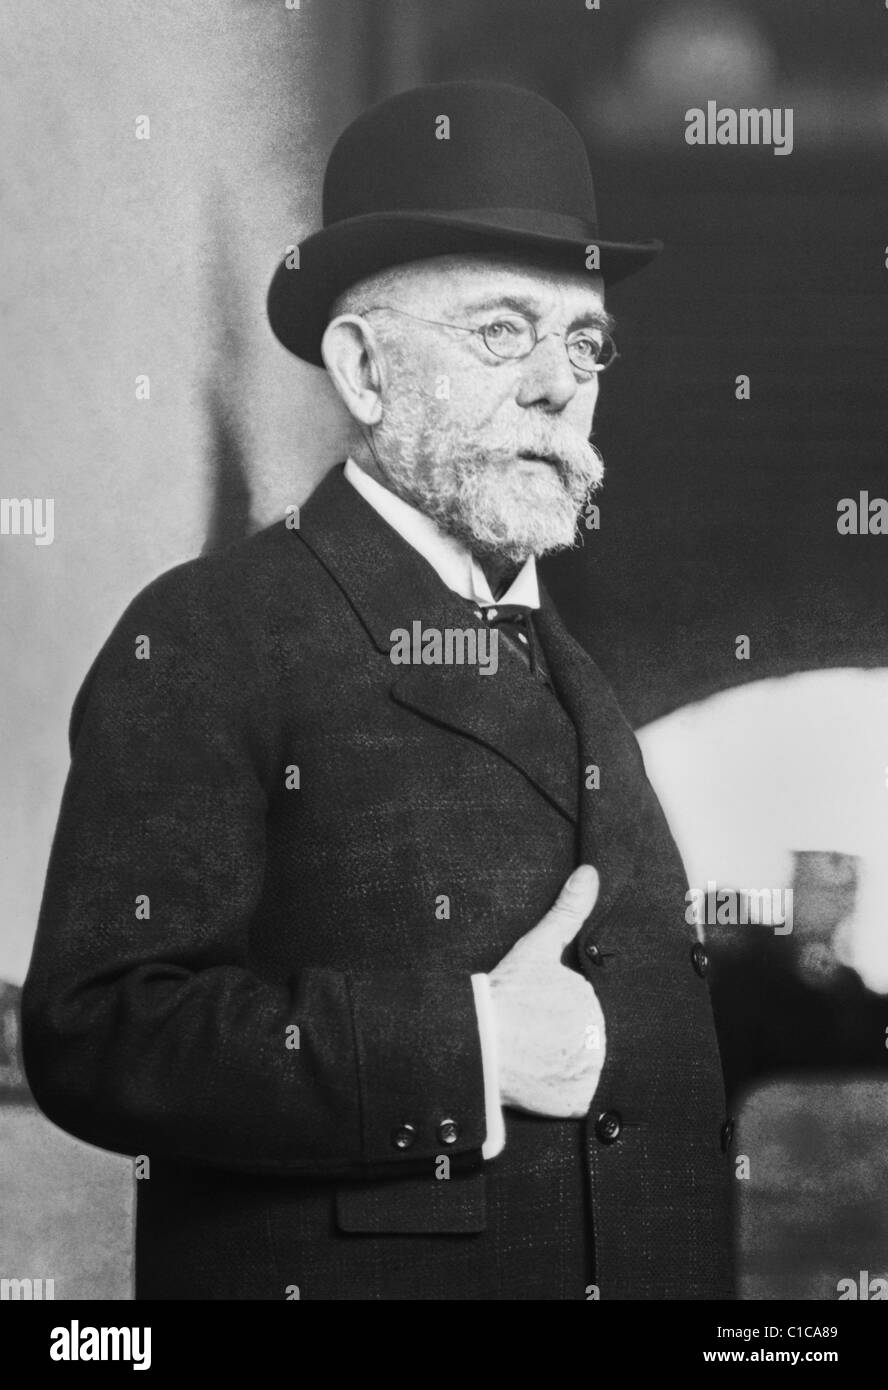 German physician Robert Koch (1843 - 1910) - winner of the Nobel Prize in Physiology or Medicine in 1905 for his research relating to tuberculosis. Stock Photo